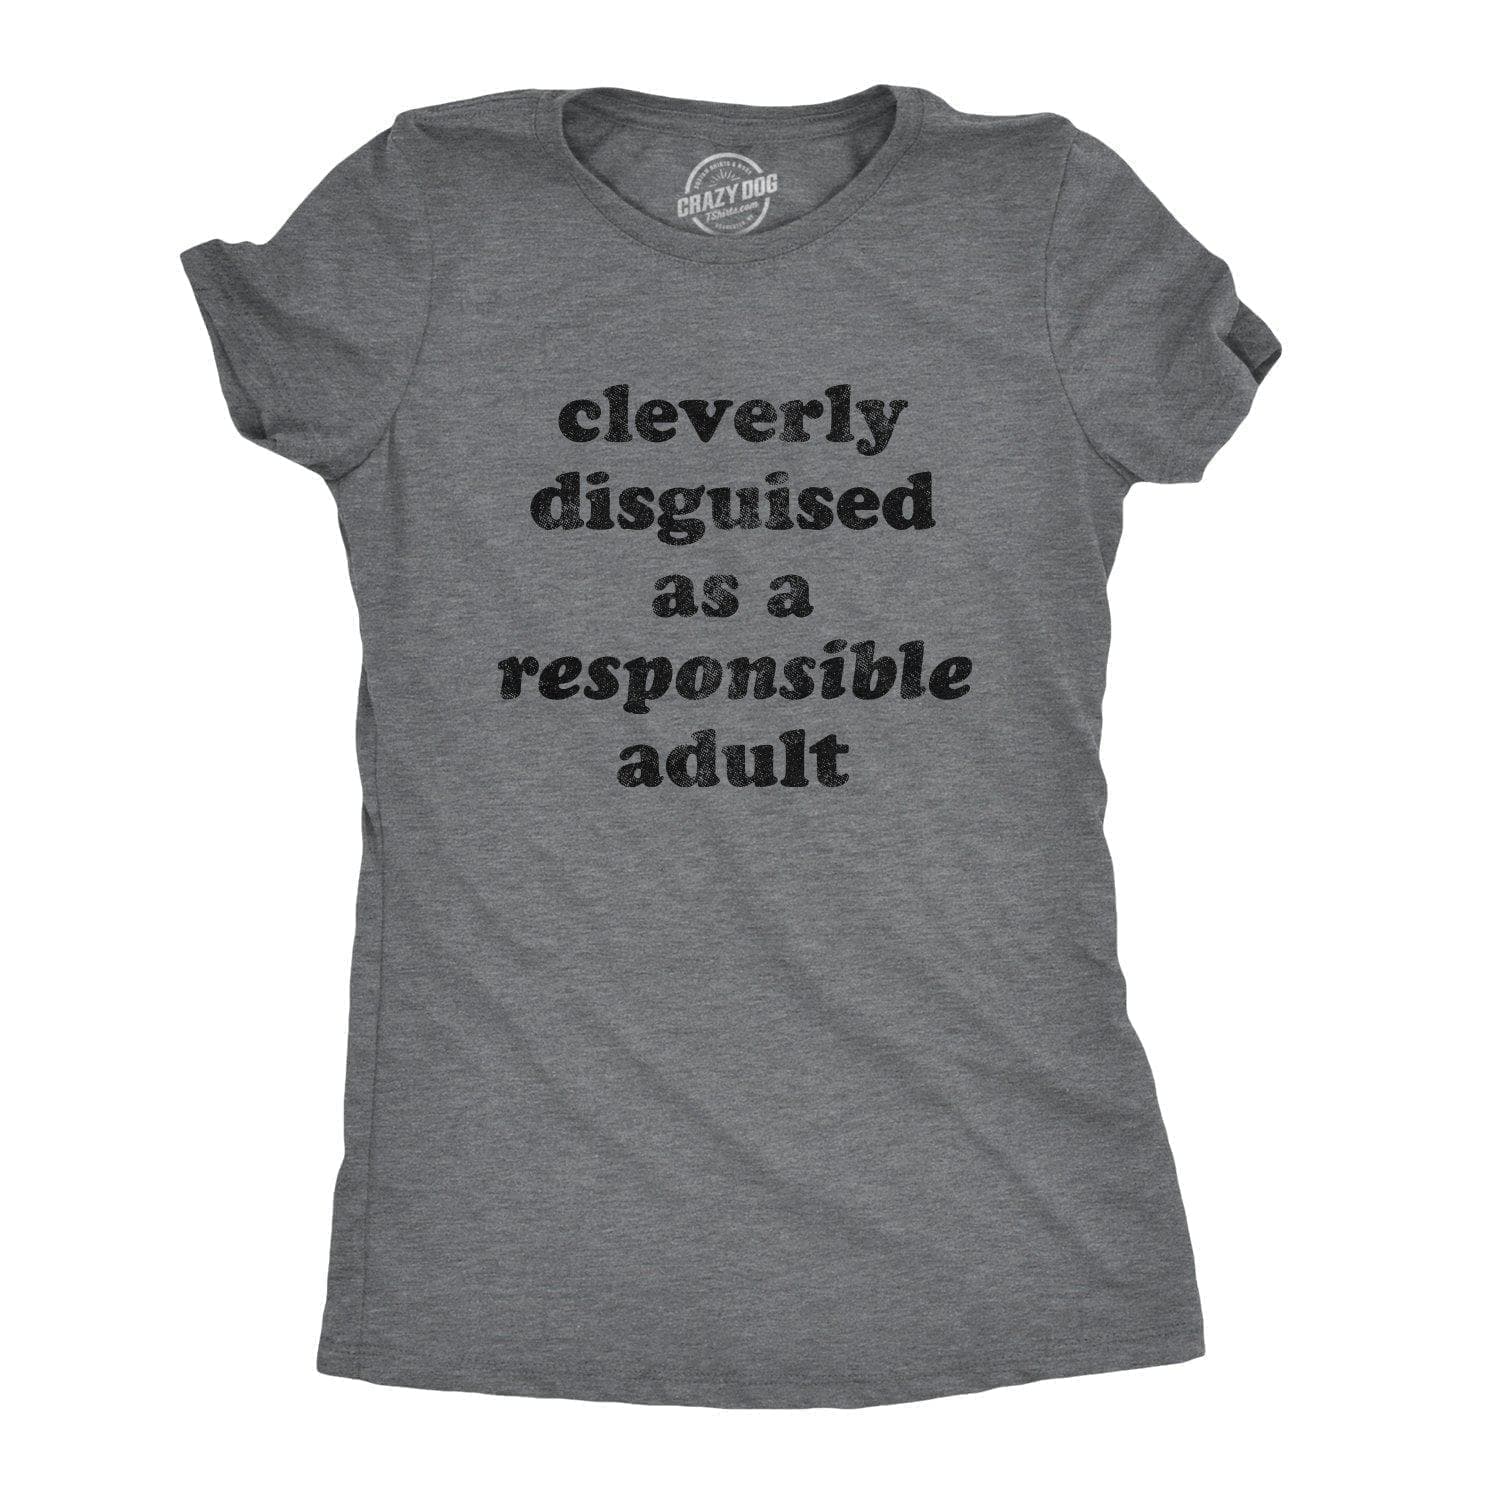 Cleverly Disguised As A Responsible Adult Women's Tshirt - Crazy Dog T-Shirts